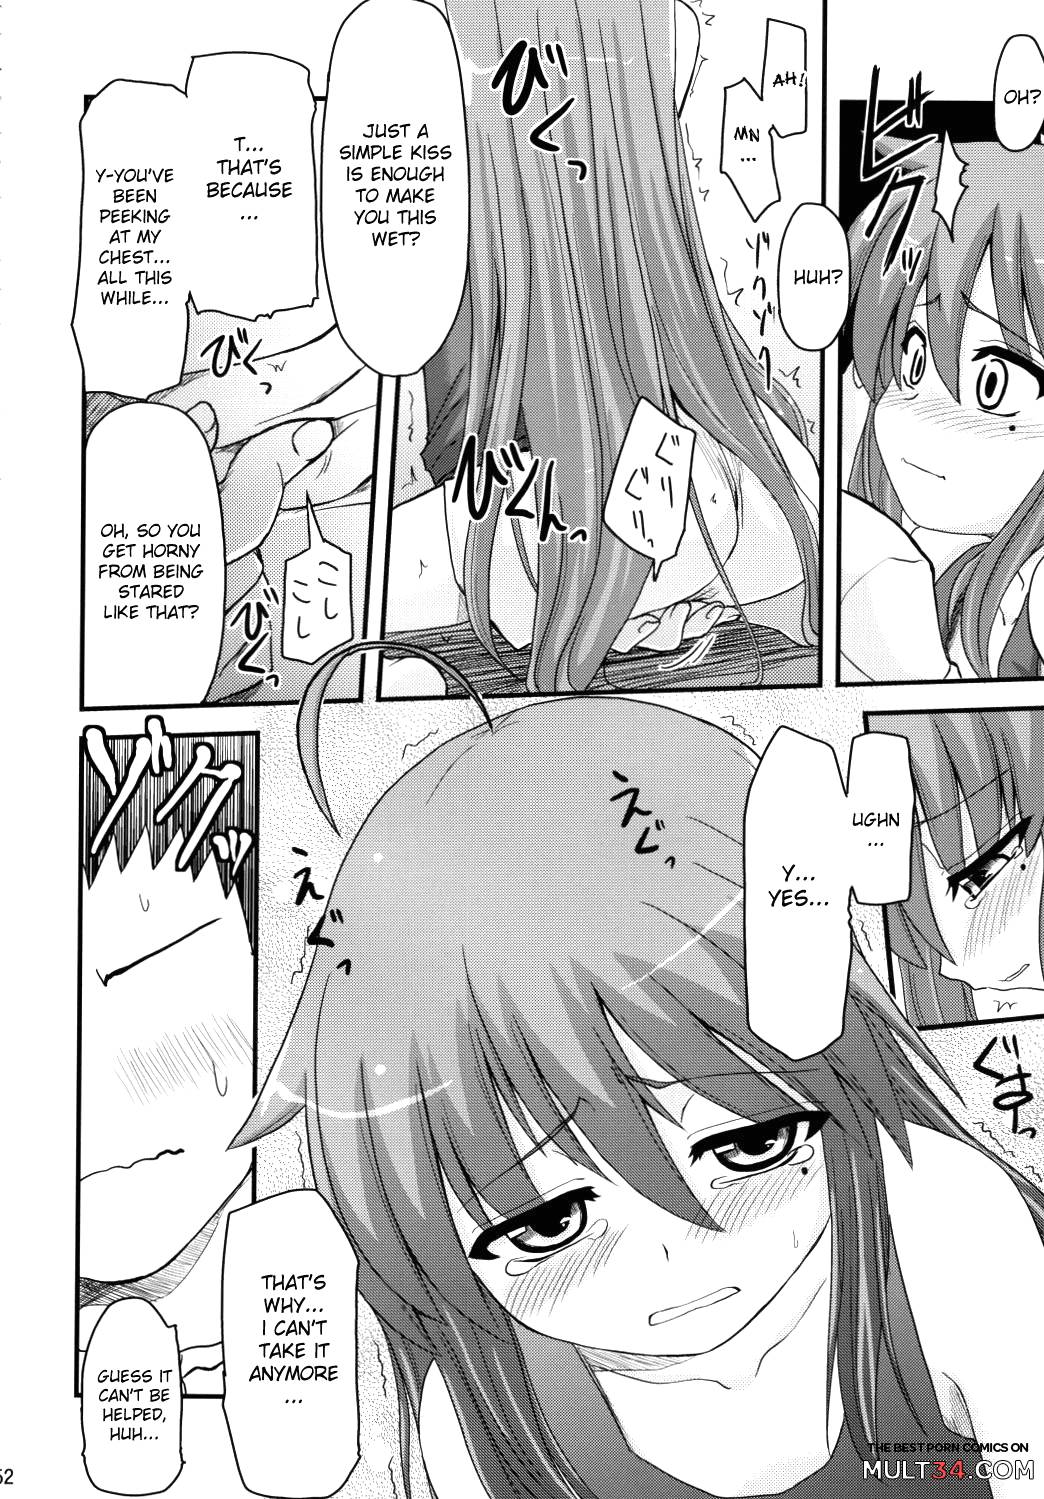 Konata and Oh-zu 4 people each and every one + 1 page 48